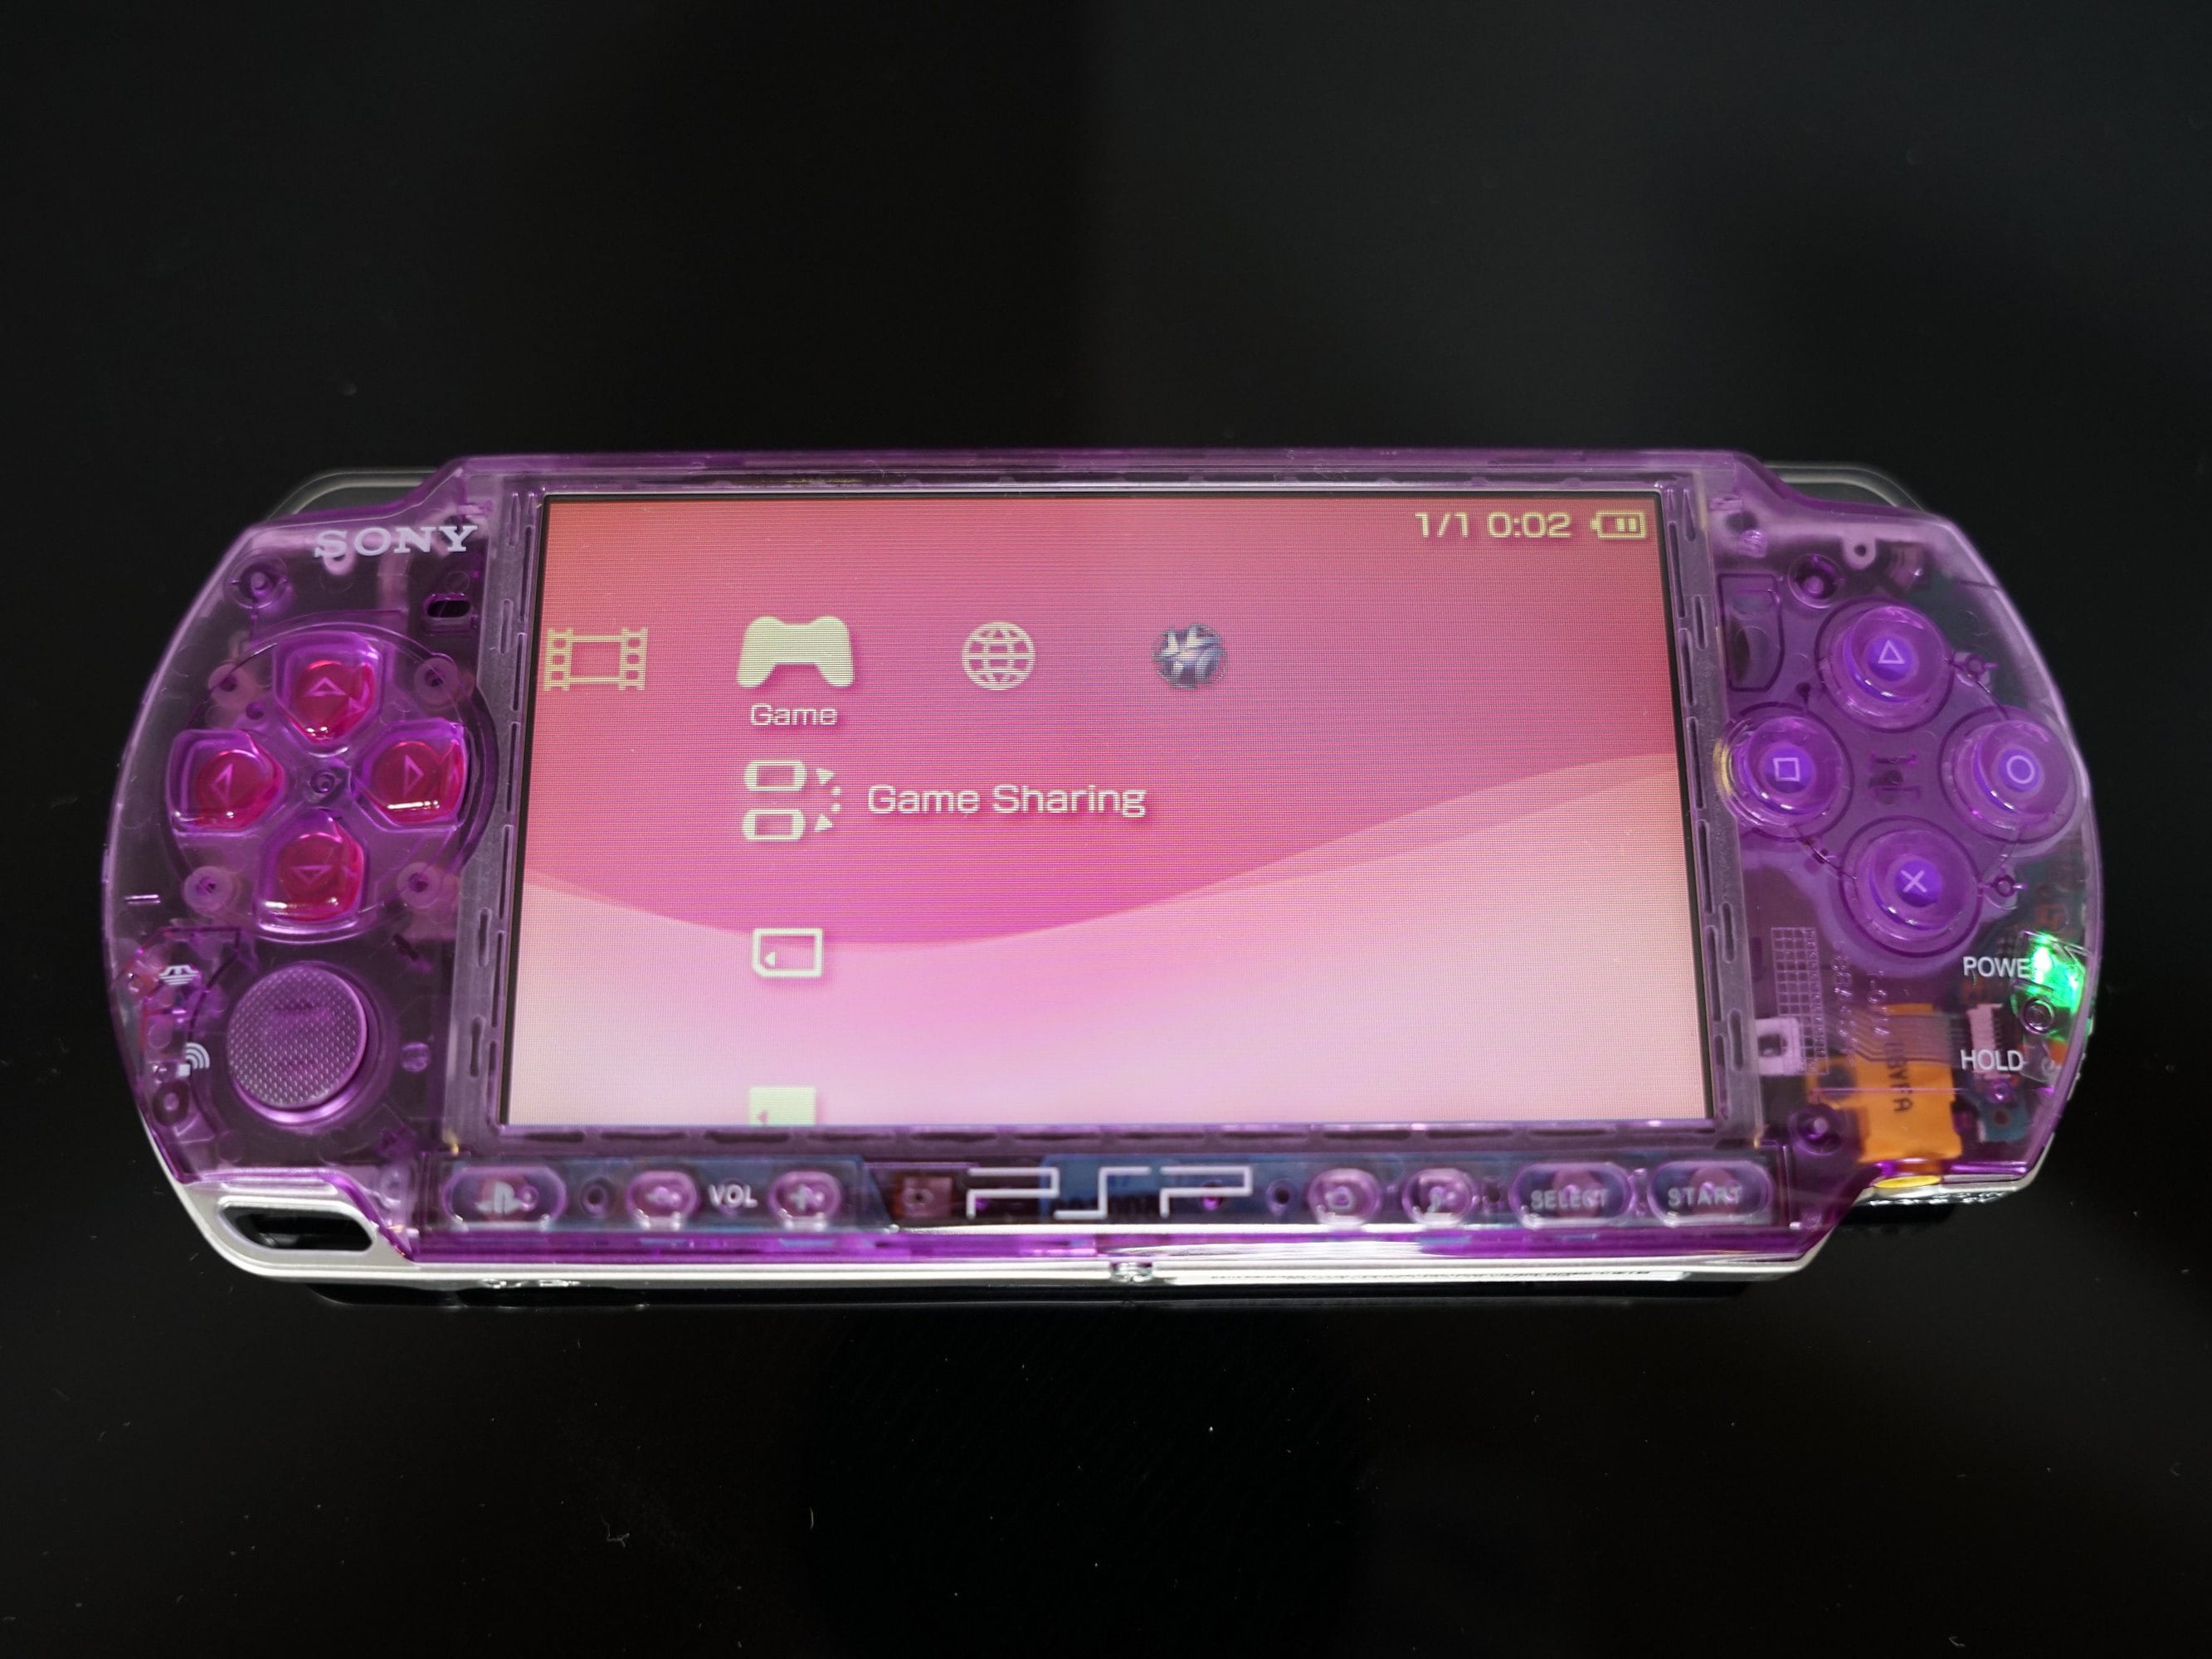 Sony PSP-3000 Playstation Portable Handheld Console Clear purple Customized